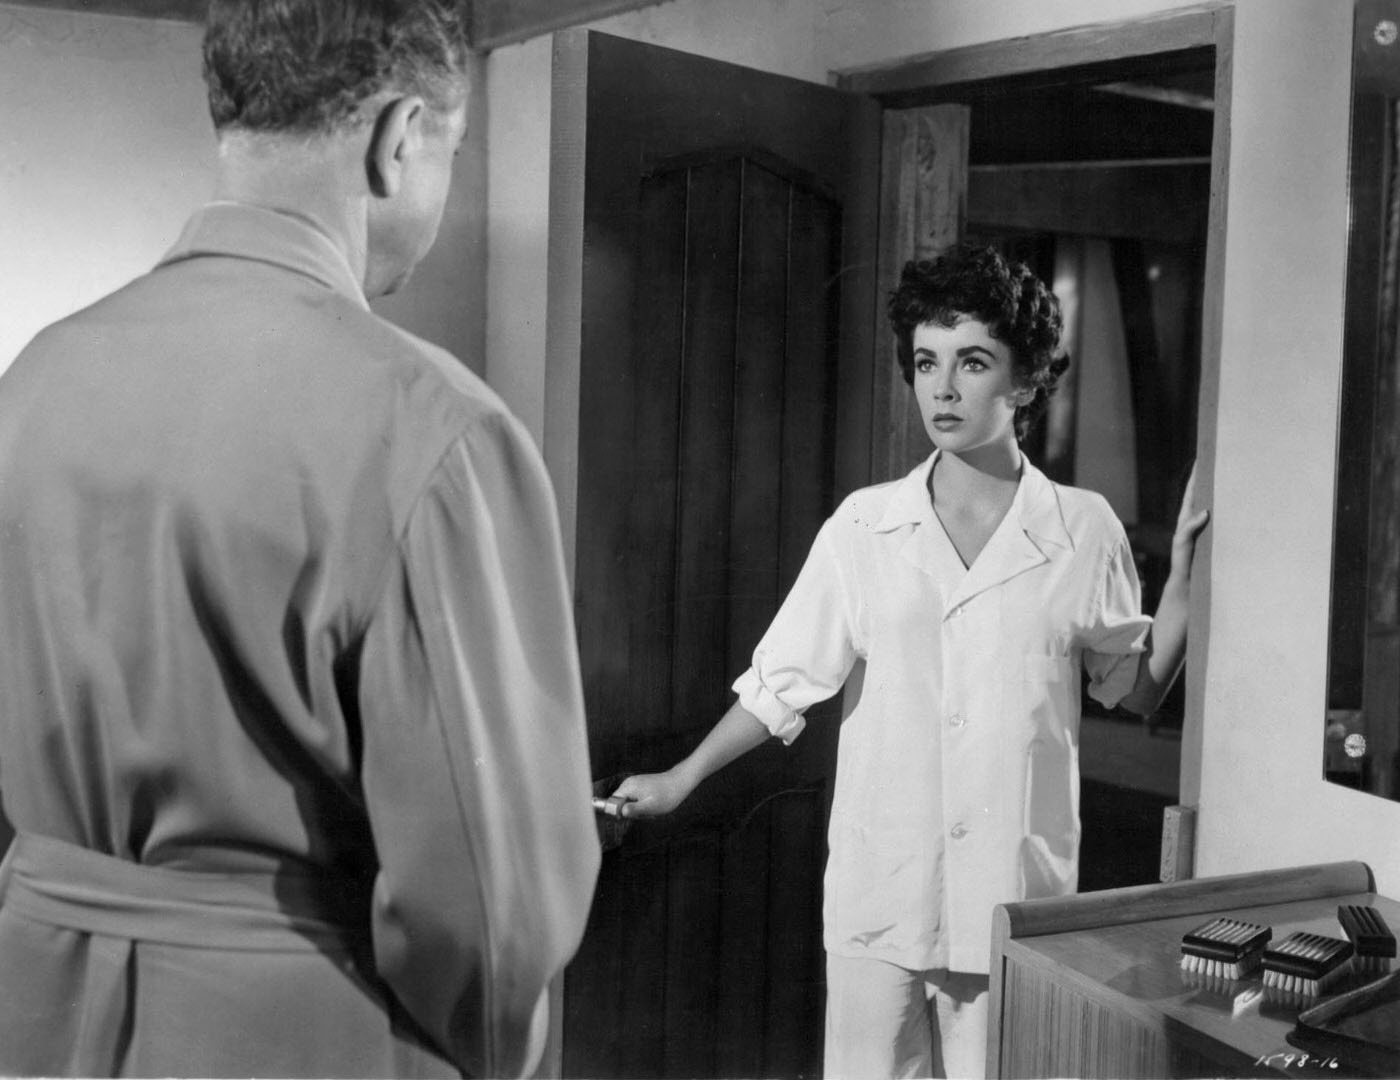 William Powell and Elizabeth Taylor in pajamas by an open door in a scene from 'Girl Who Had Everything' (1953).